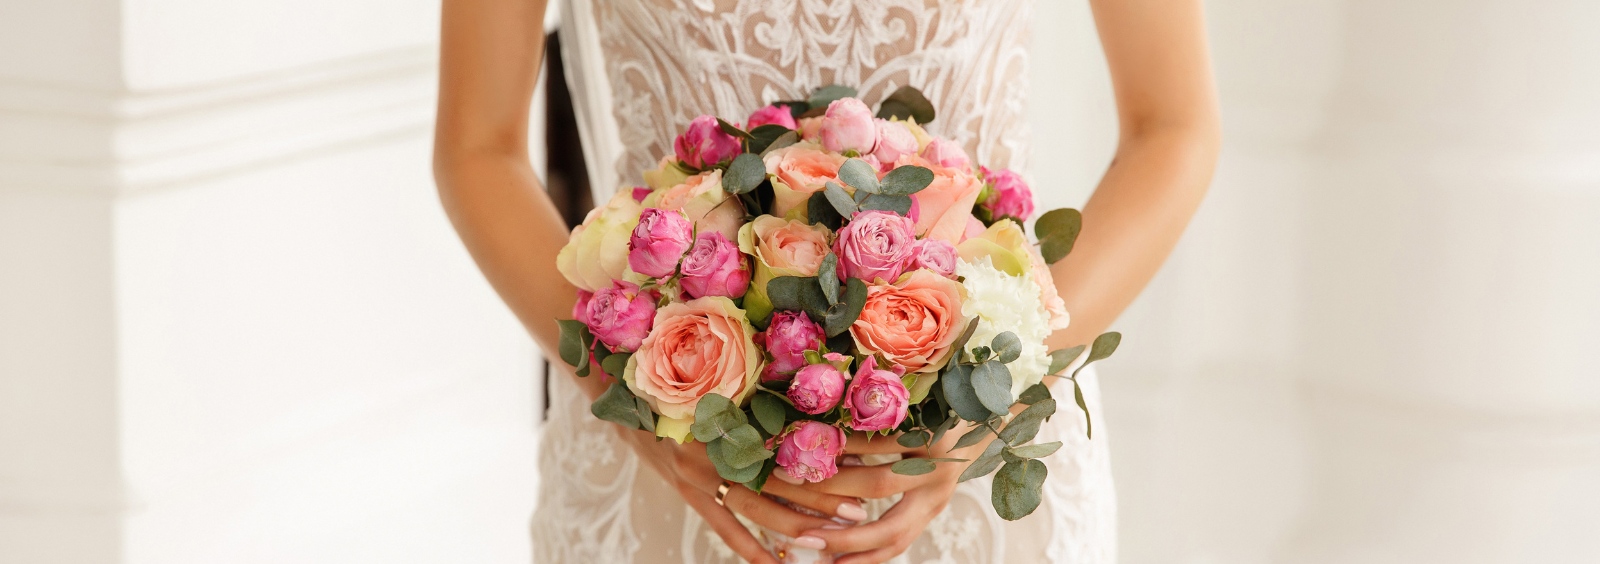 A bride holding a bouquet in front of her dress.